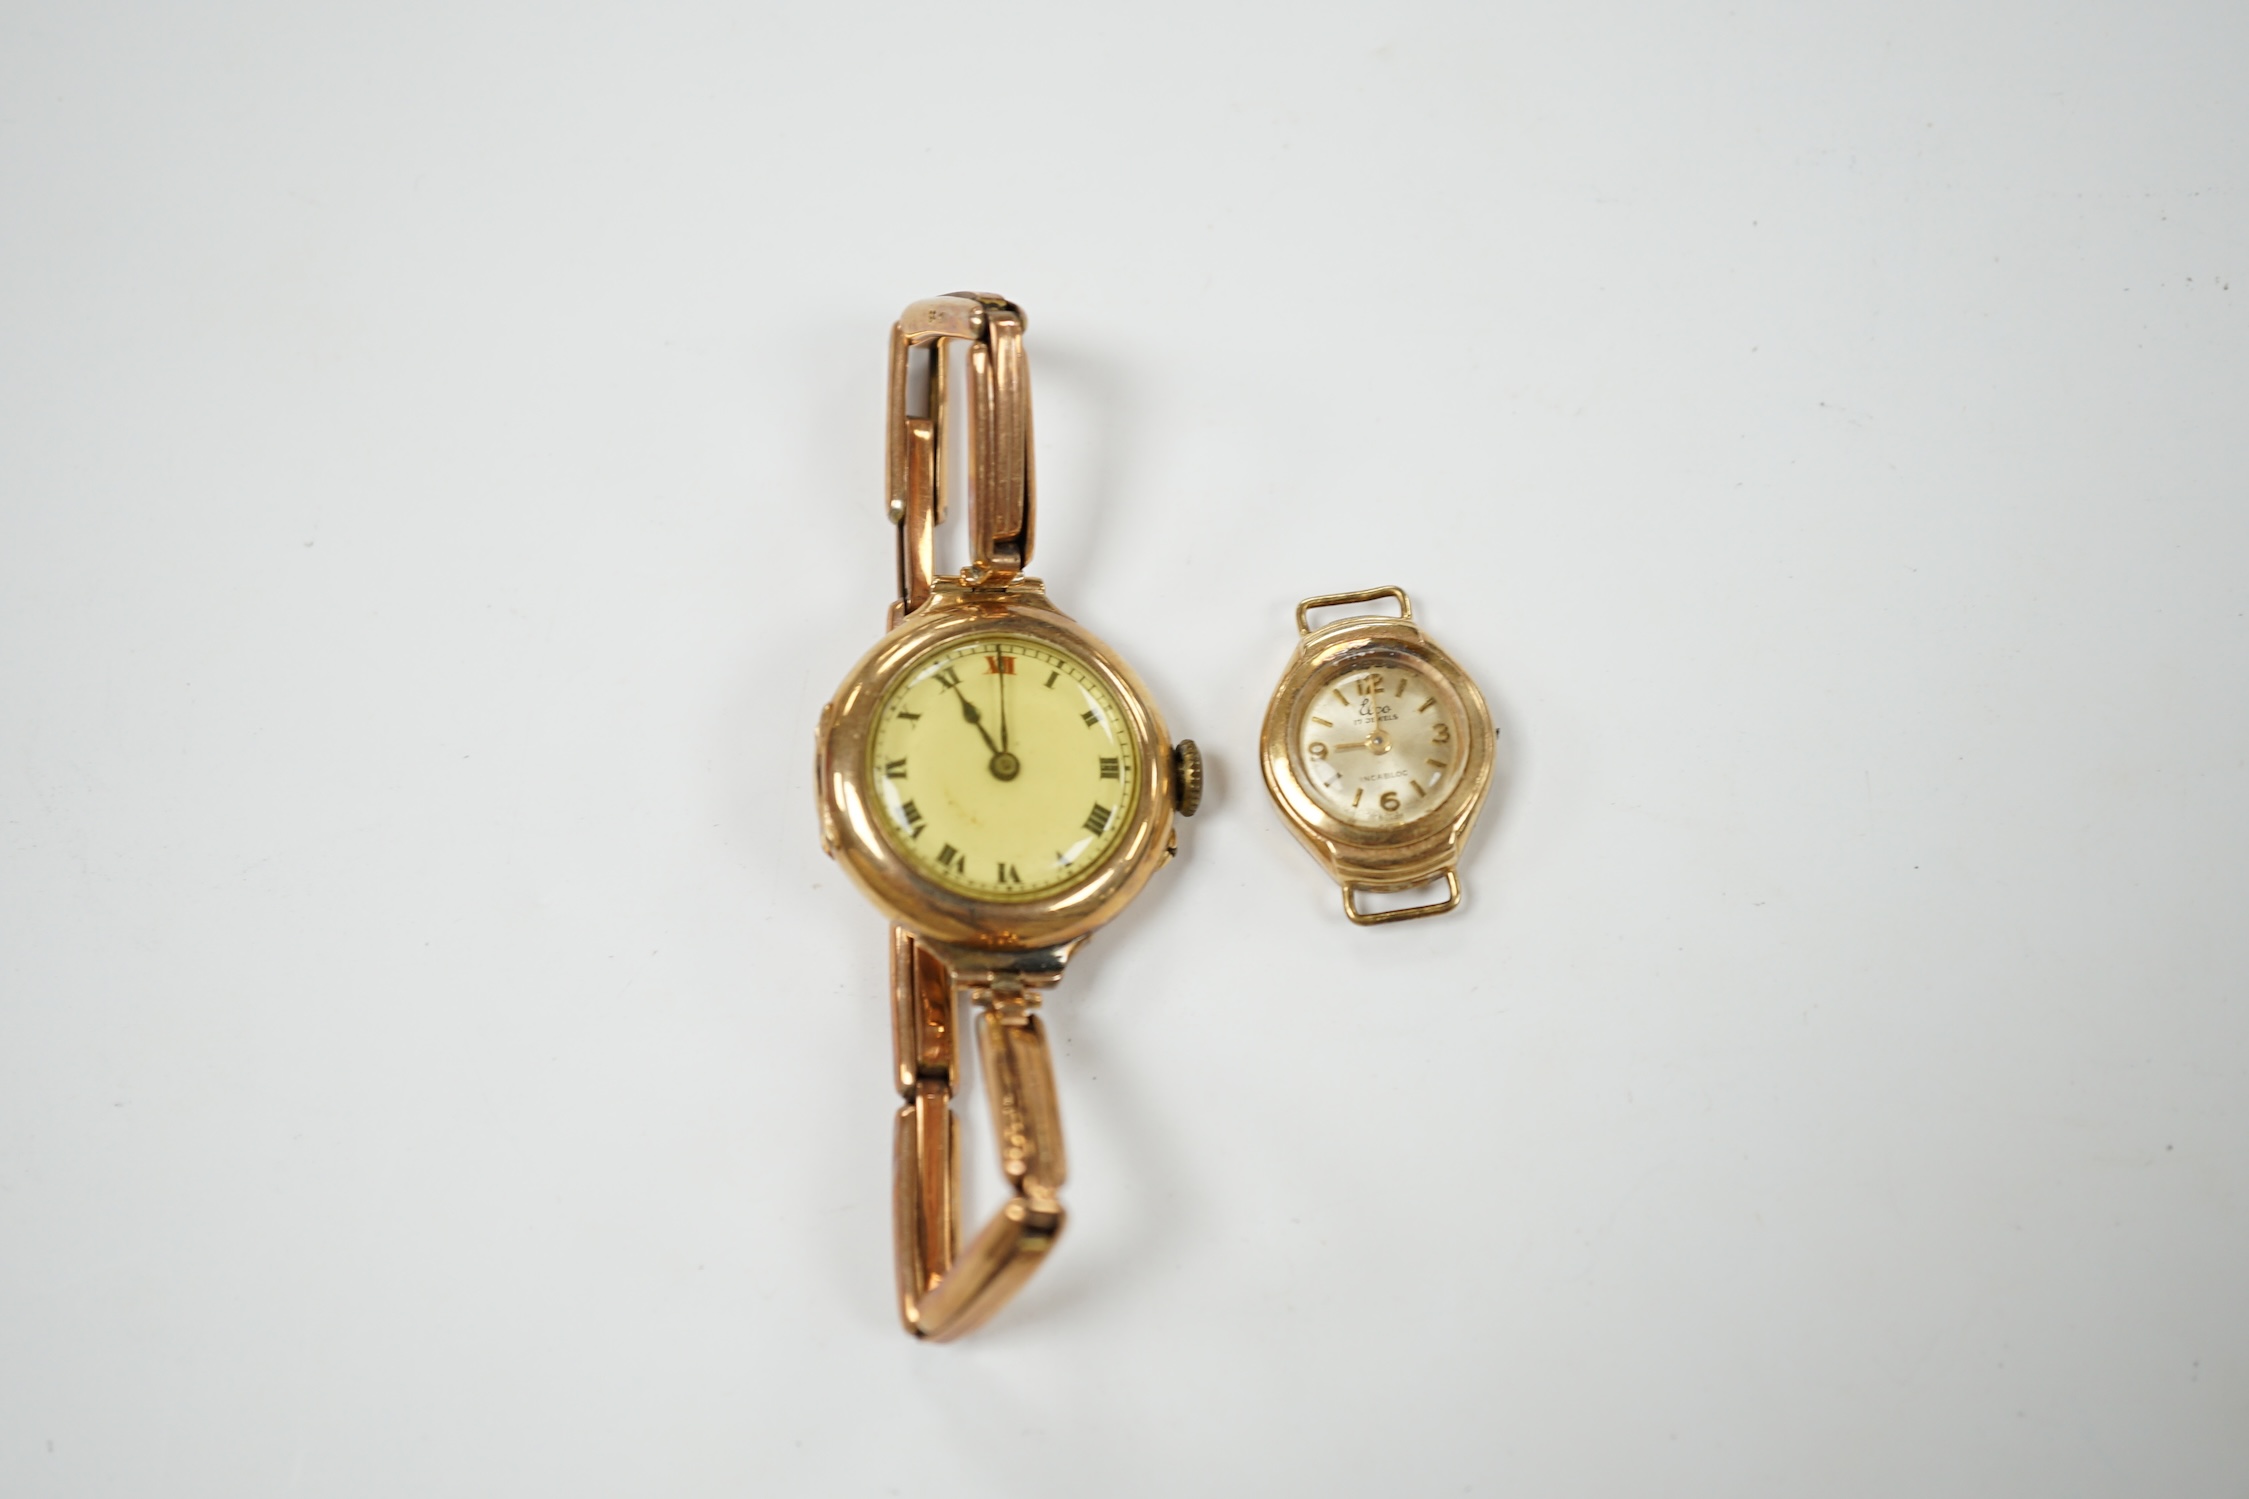 A lady's early 20th century 9ct gold manual wind wrist watch, on a 9ct expanding bracelet, gross weight 19.4 grams, together with a lady's 9ct gold Elco watch. Condition - poor